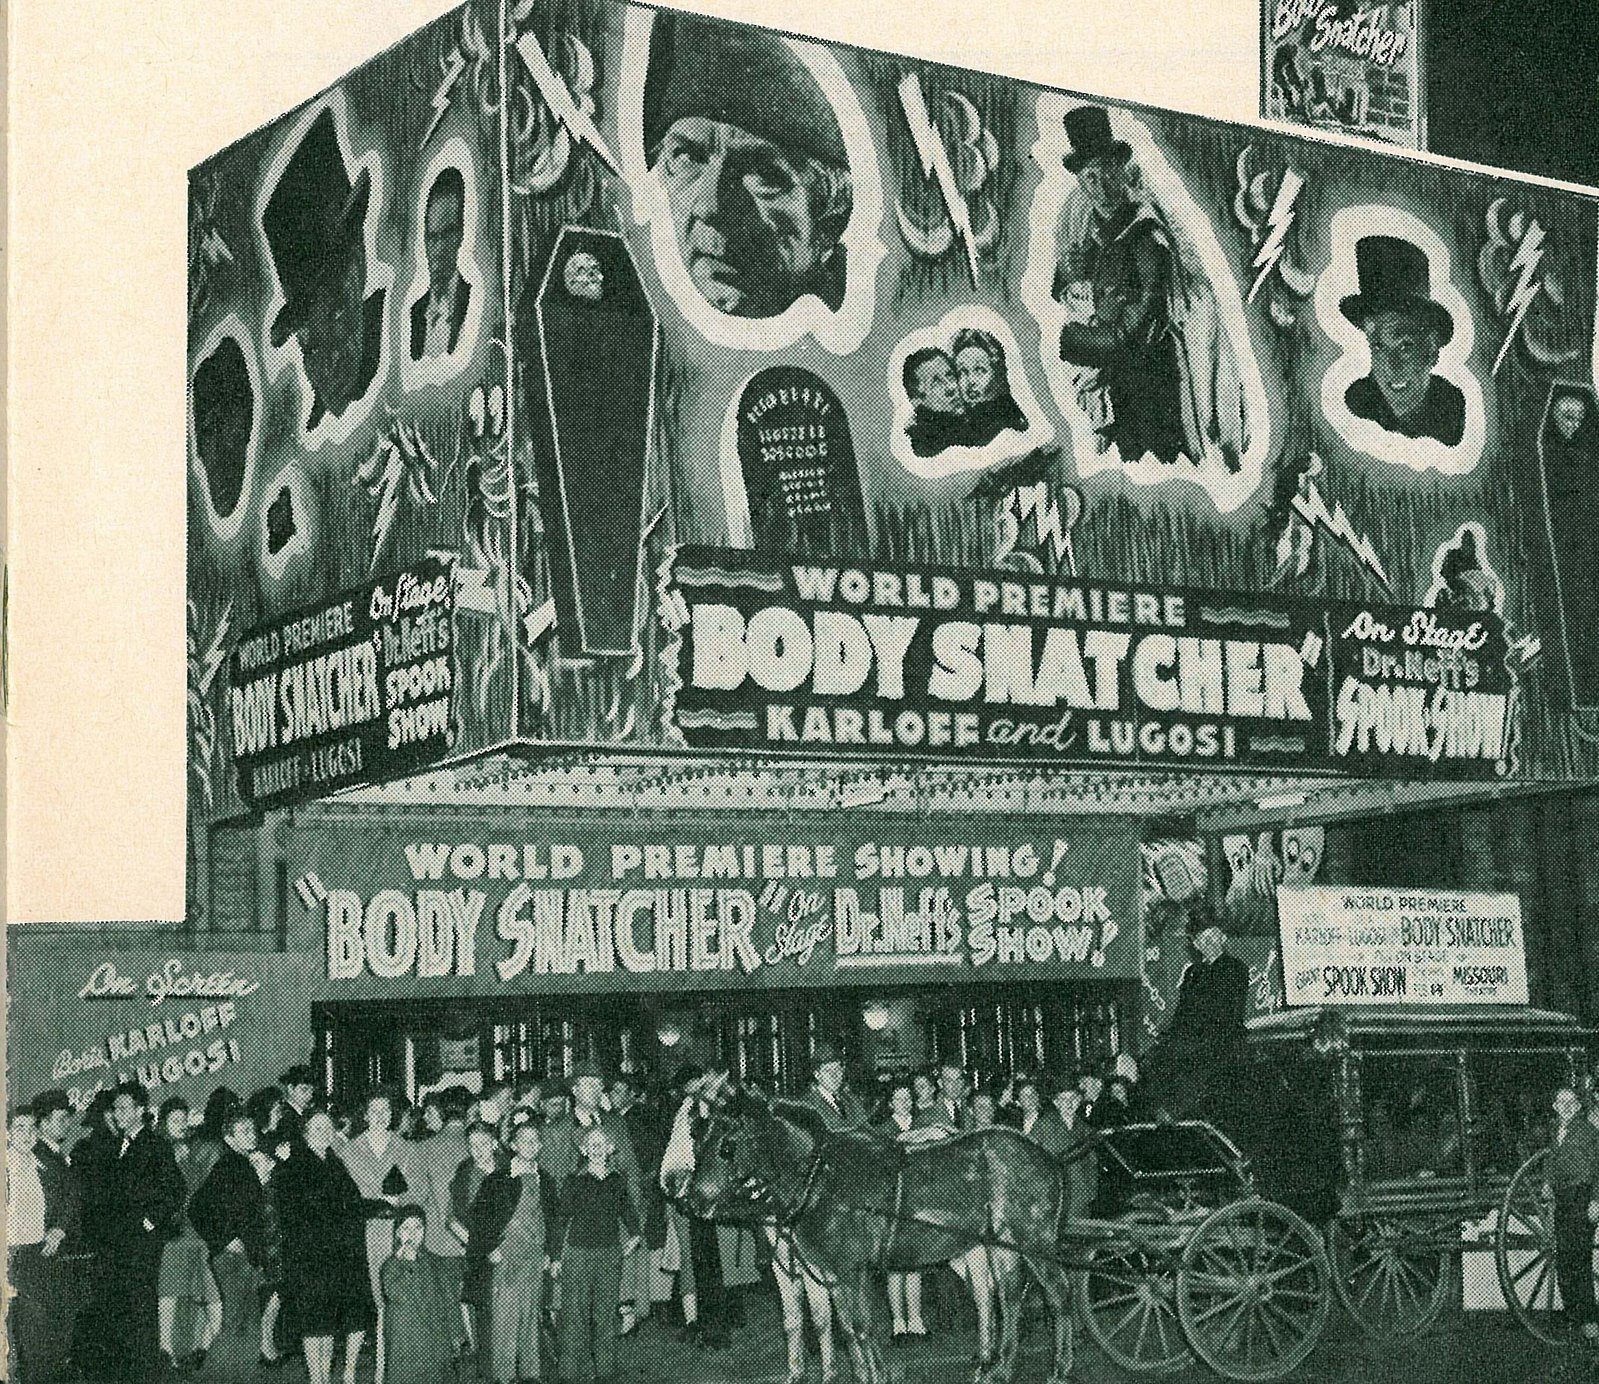 A black and white advertisement for a movie theater.